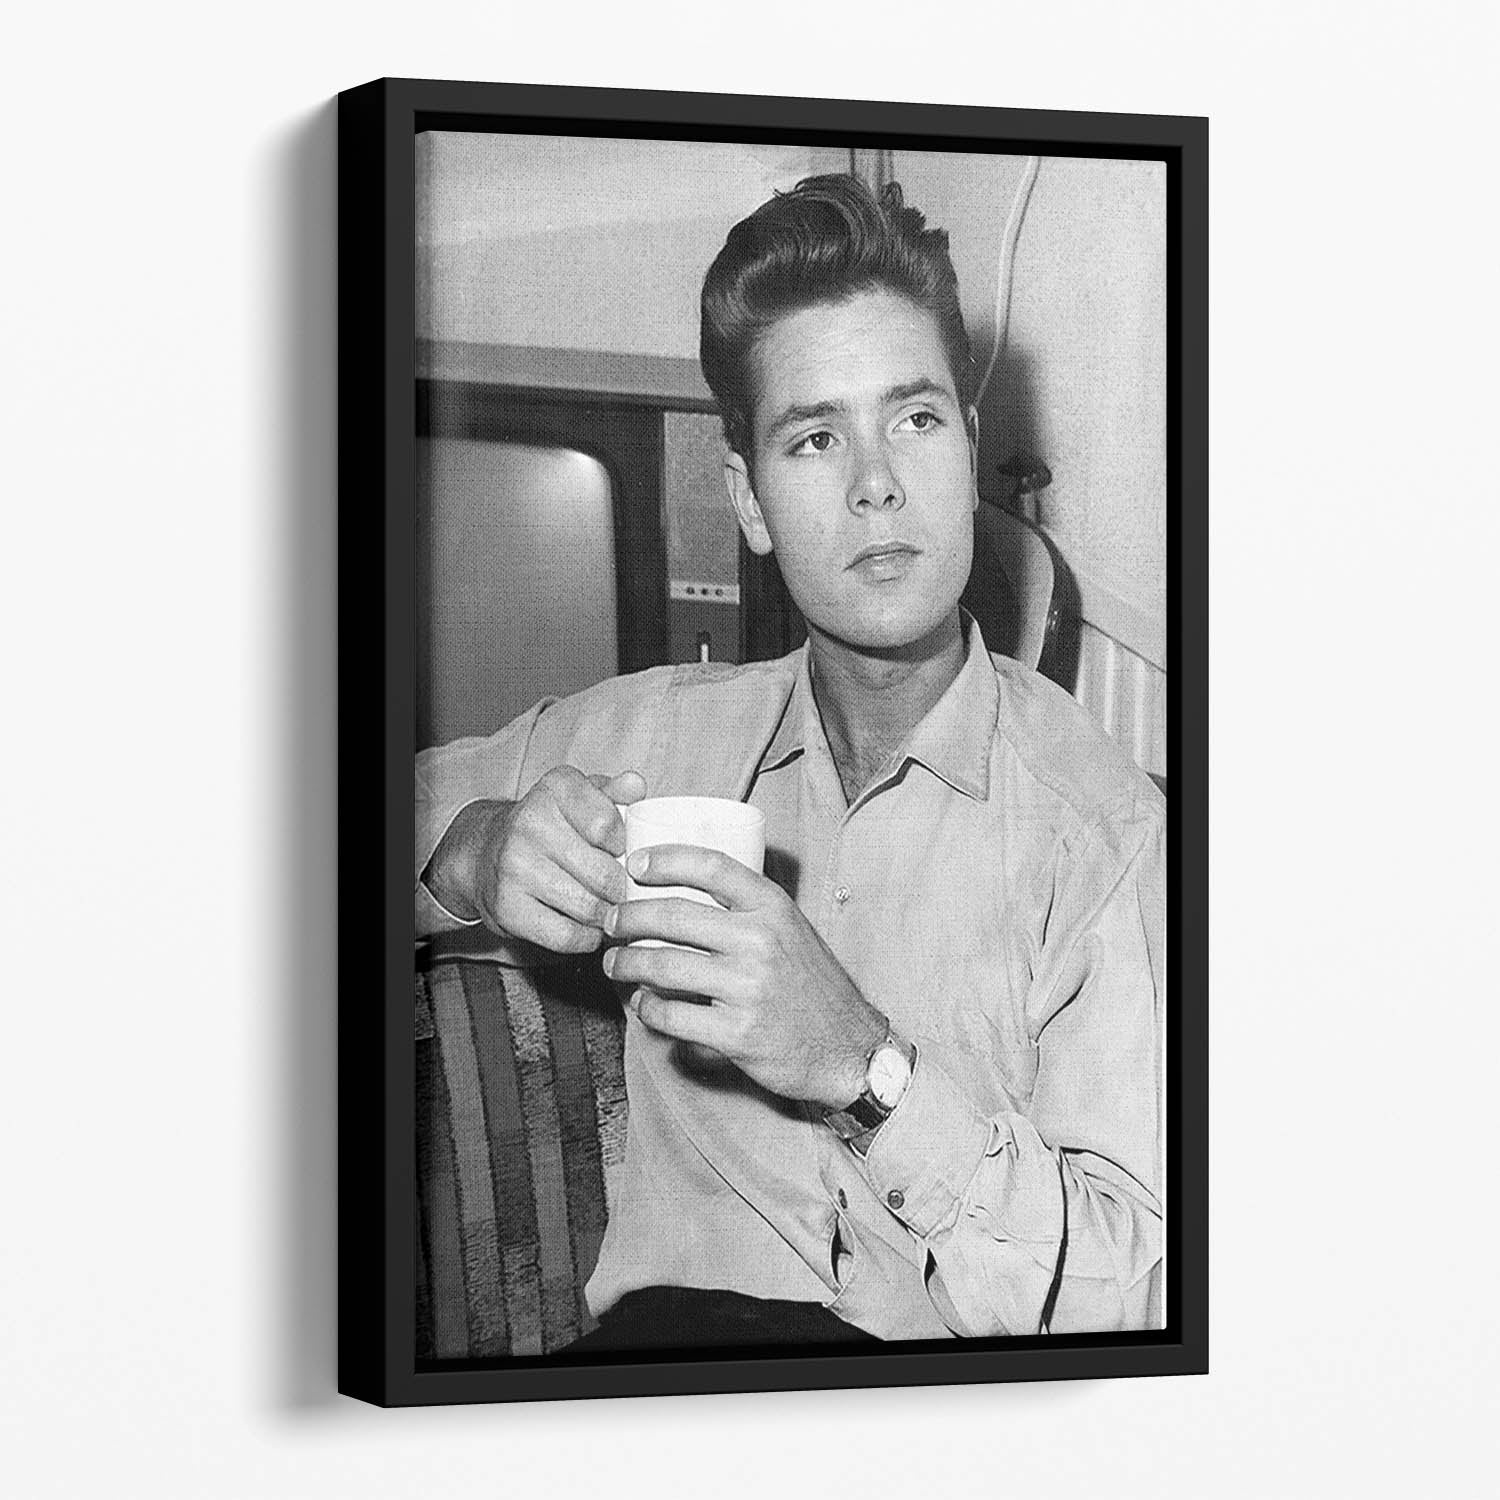 Cliff Richard with a cup of tea Floating Framed Canvas